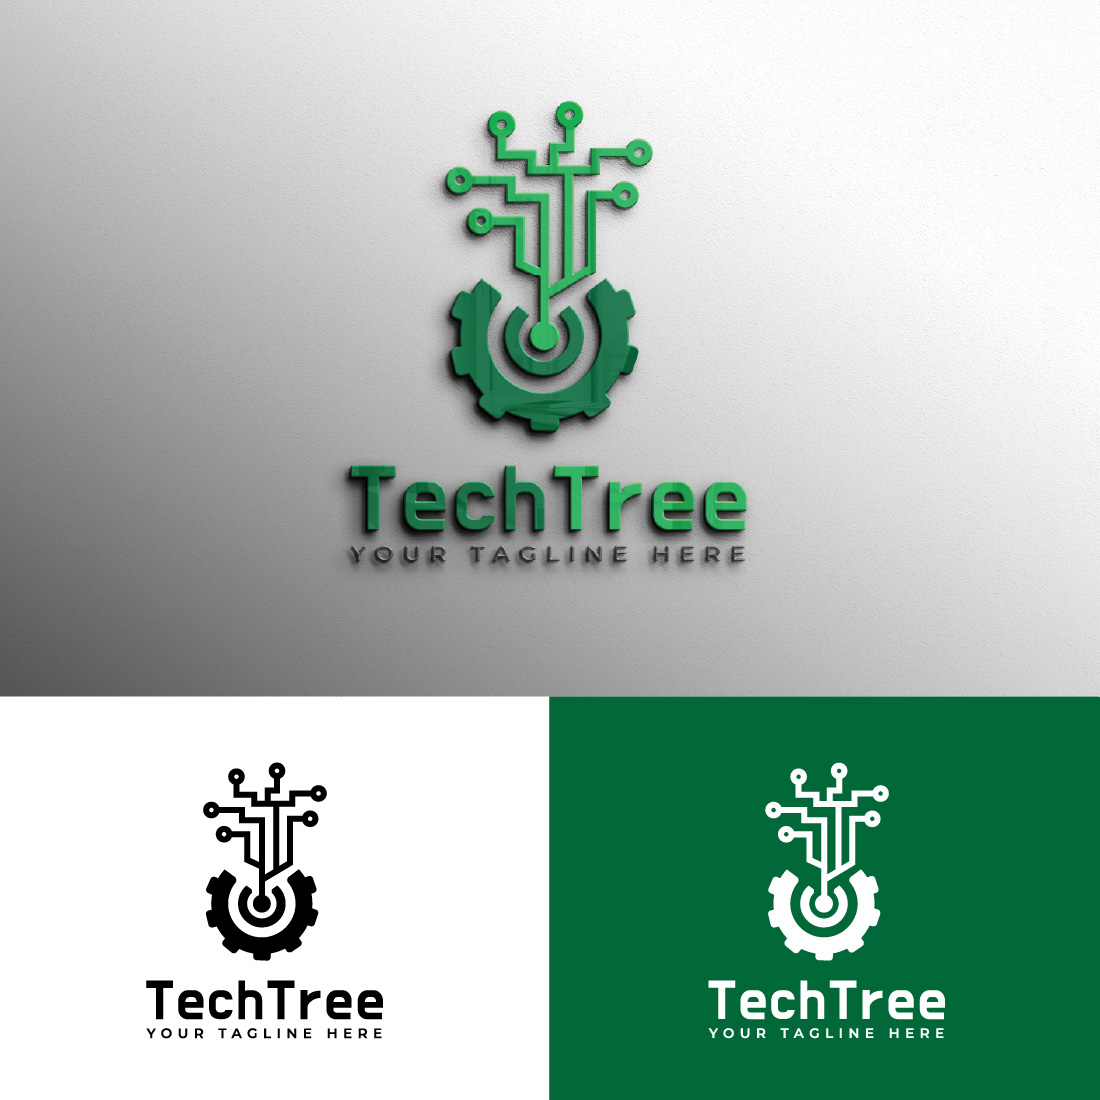 Engineering Tech Tree Gear Logo Design Template cover image.